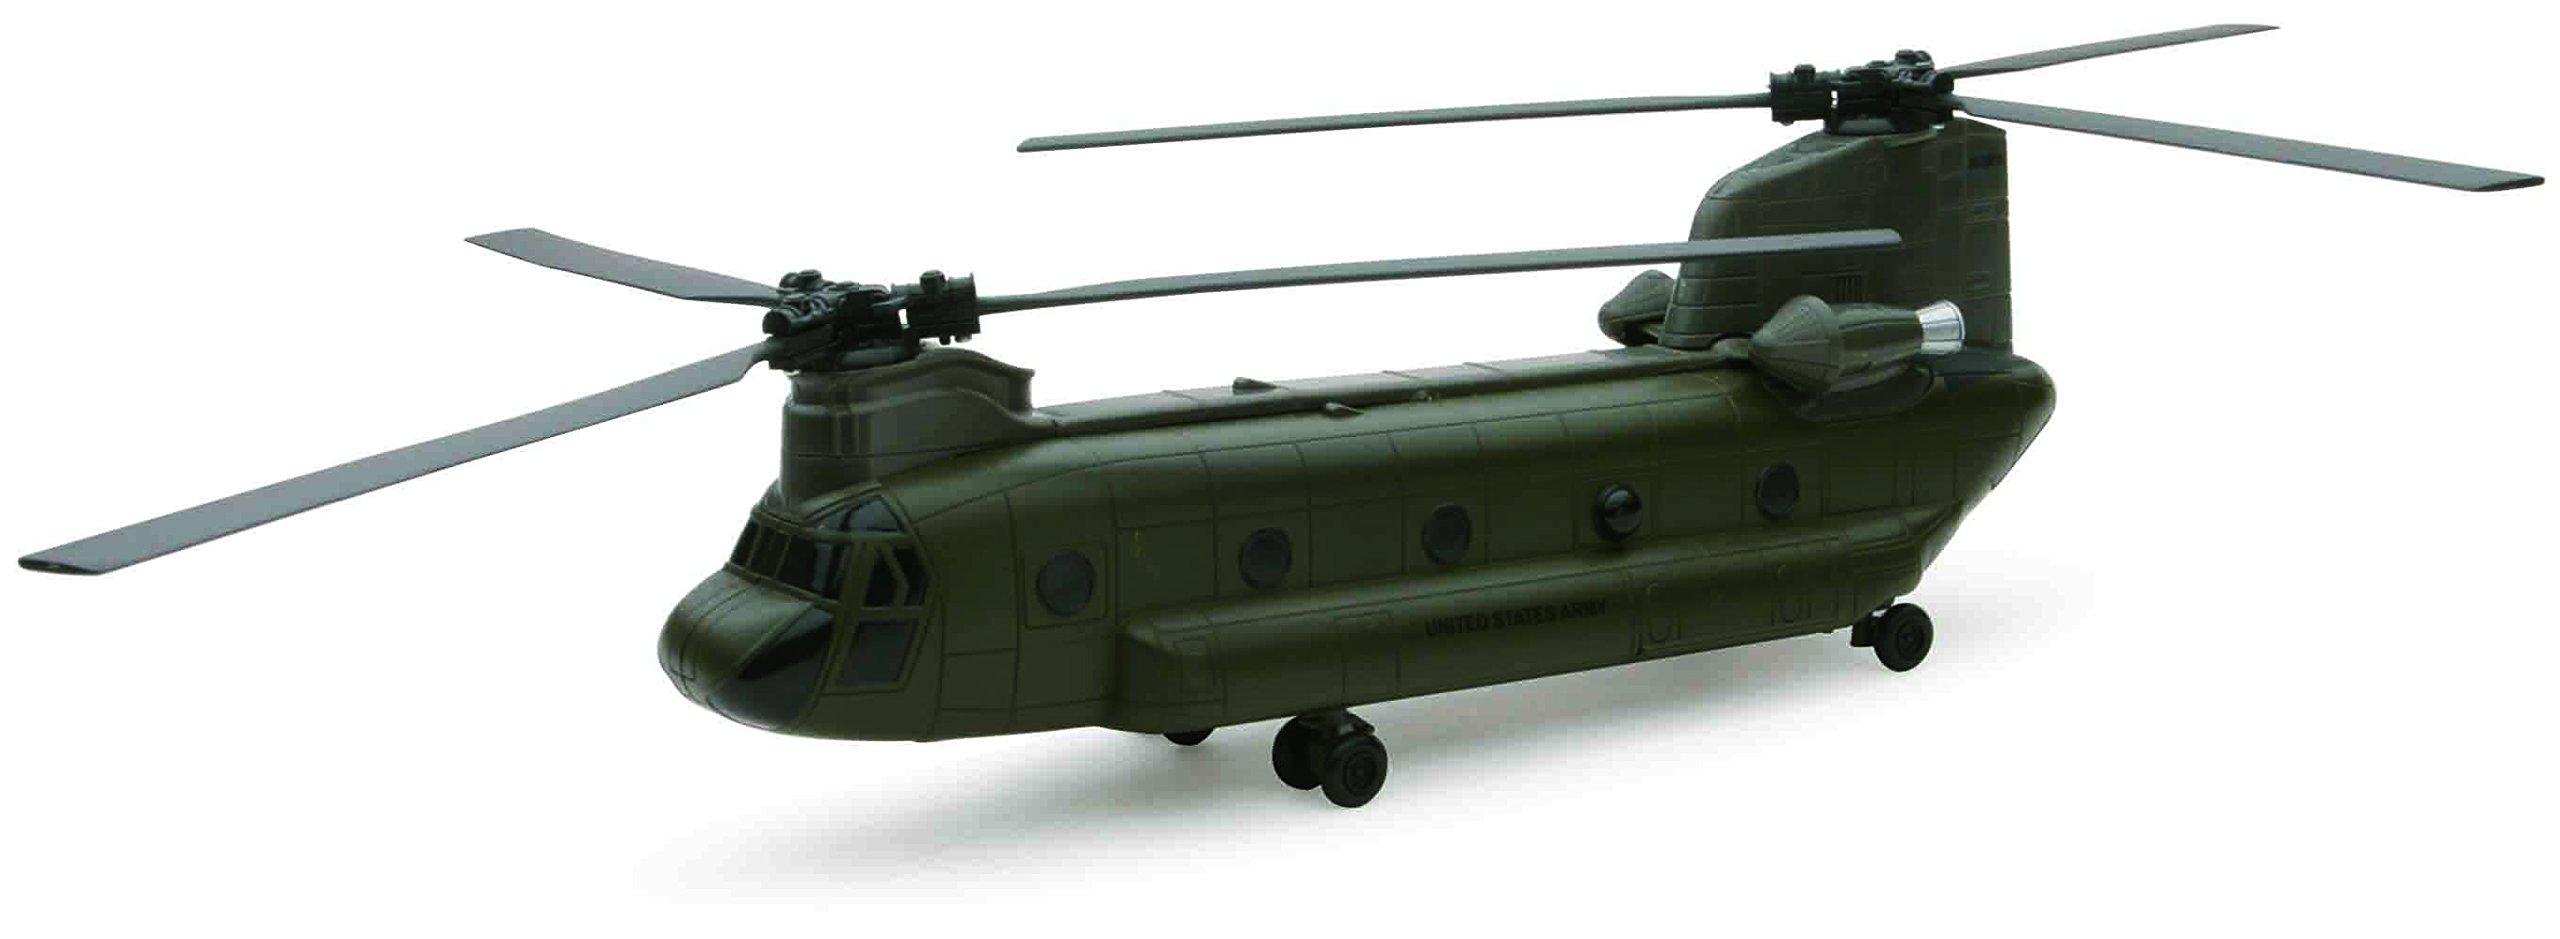 Boeing Ch 47 Chinook Rc Helicopter: Mastering the Thrills of Flying a Remote Control Chinook